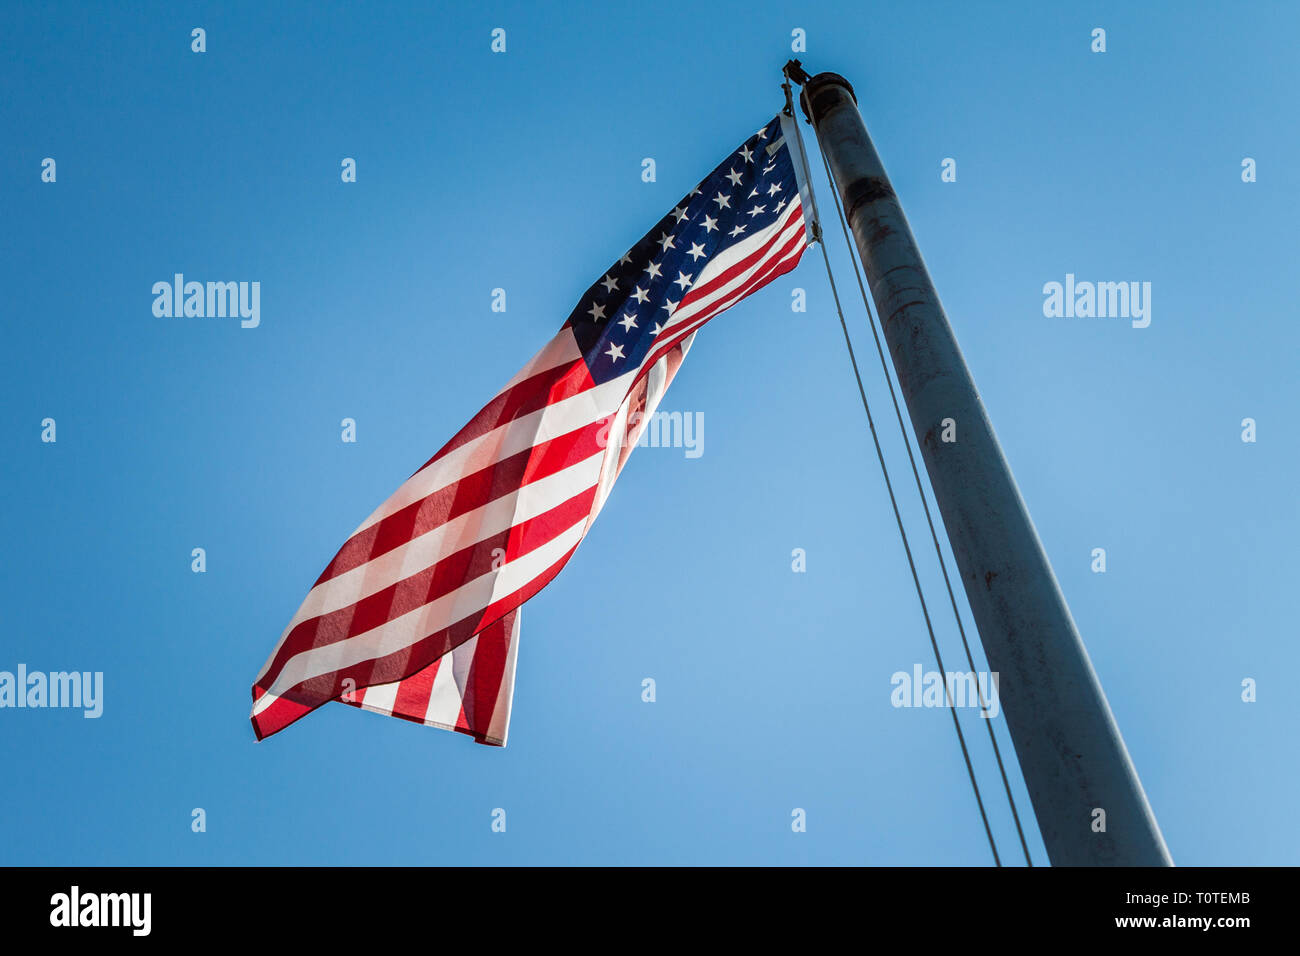 The American flag flying high on a bright, sunny day. Stock Photo